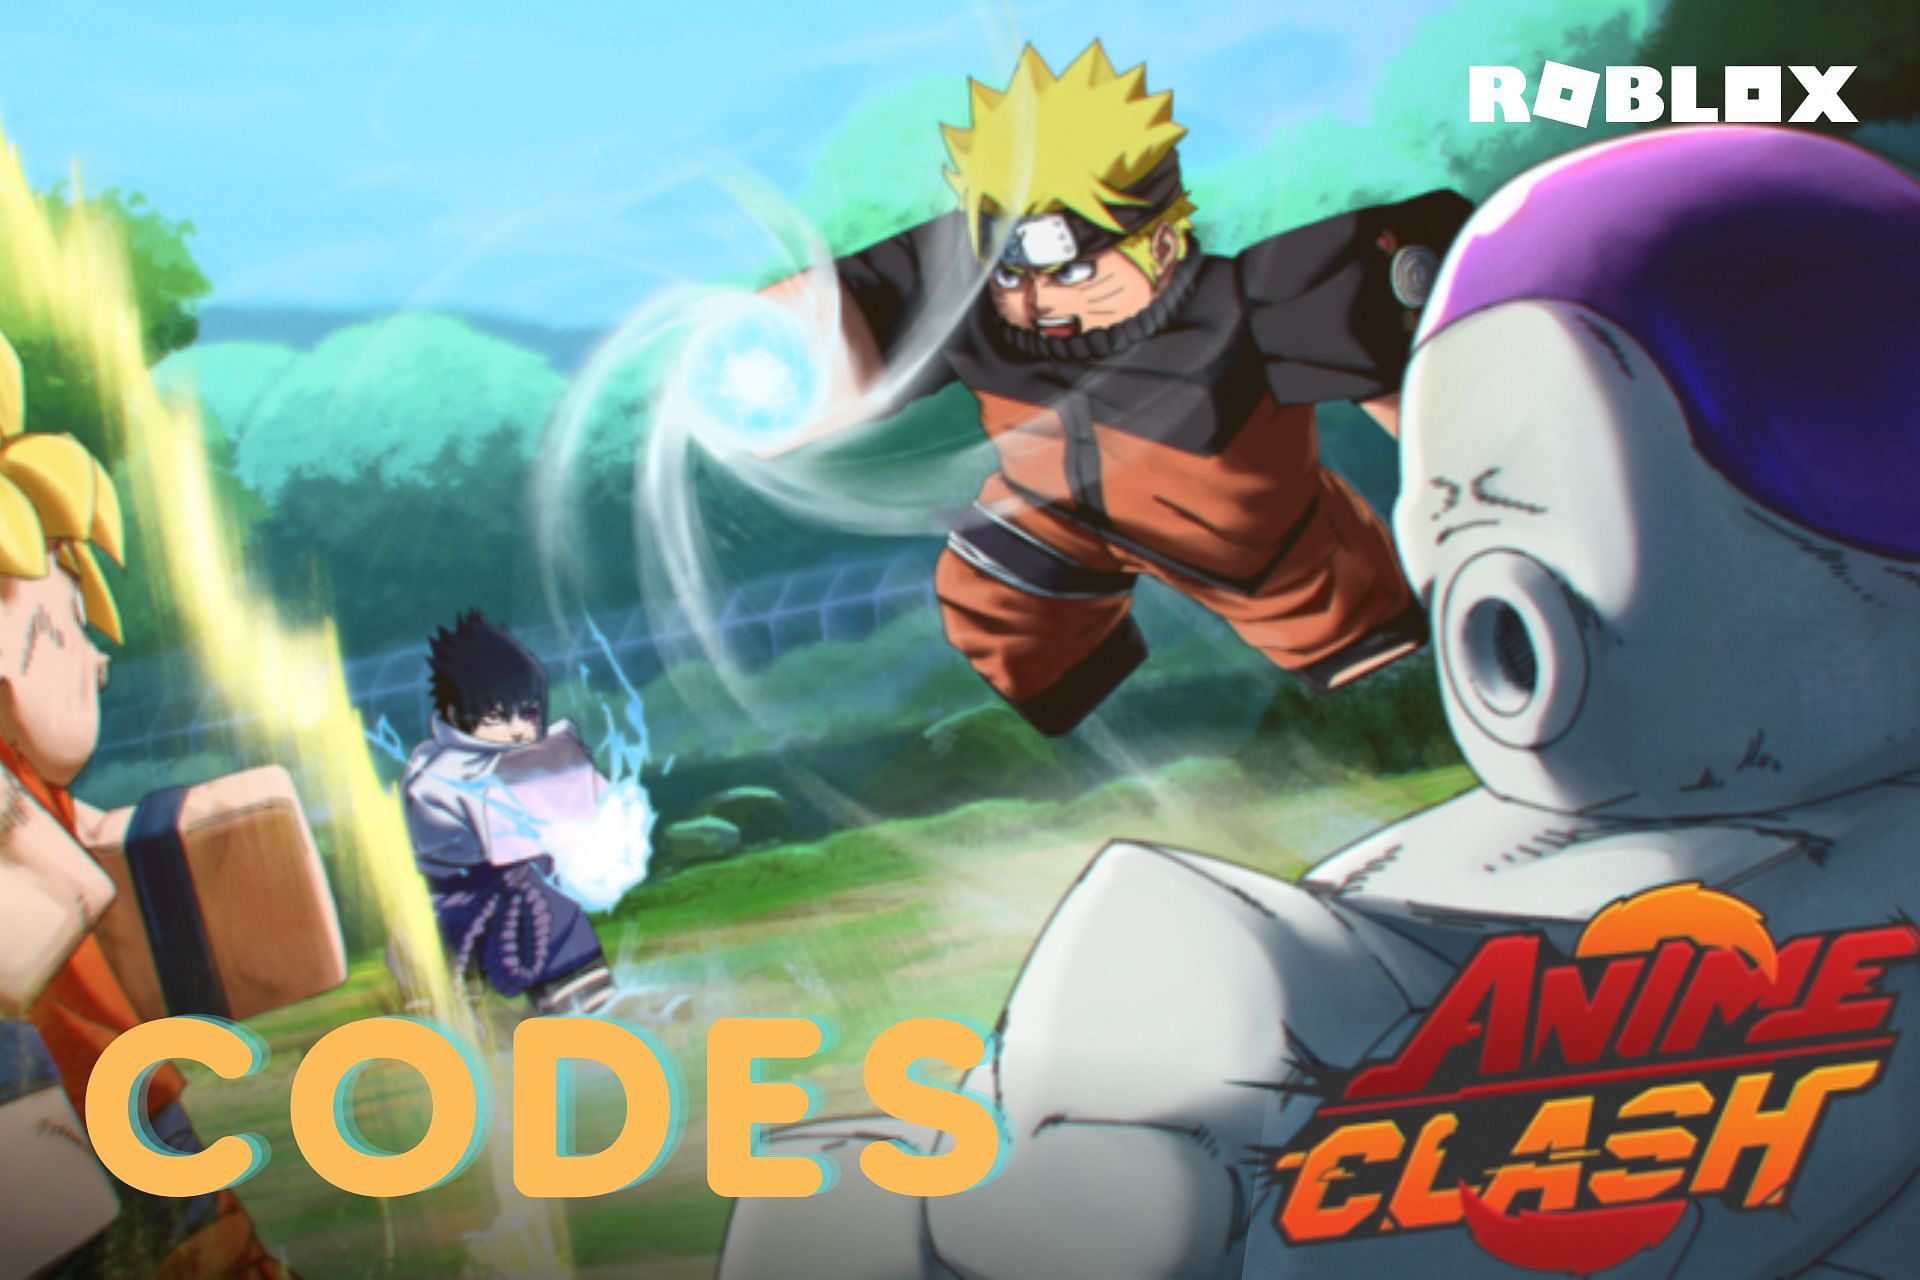 NEW* ALL CODES FOR Anime Energy Clash Simulator IN ROBLOX Anime Energy  Clash Simulator CODES 